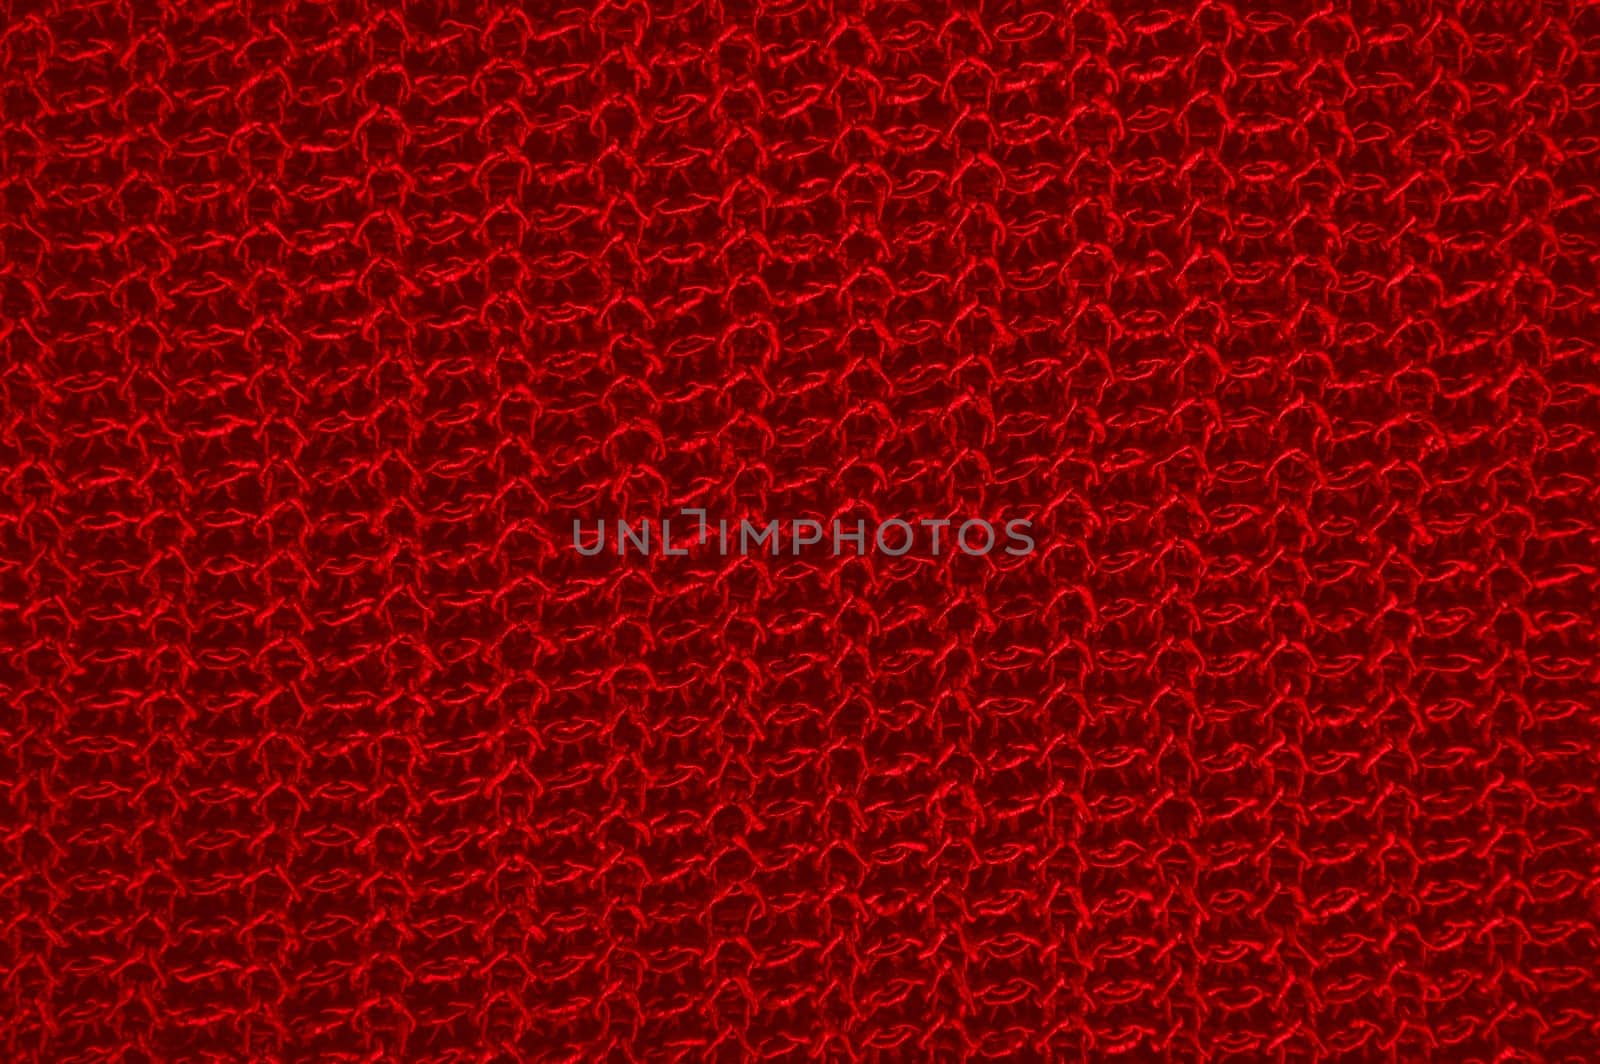 Weave Abstract Wool. Vintage Woven Texture. Macro Handmade Winter Background. Cotton Knitted Fabric. Red Fiber Thread. Nordic Warm Print. Structure Canvas Embroidery. Knitted Wool.